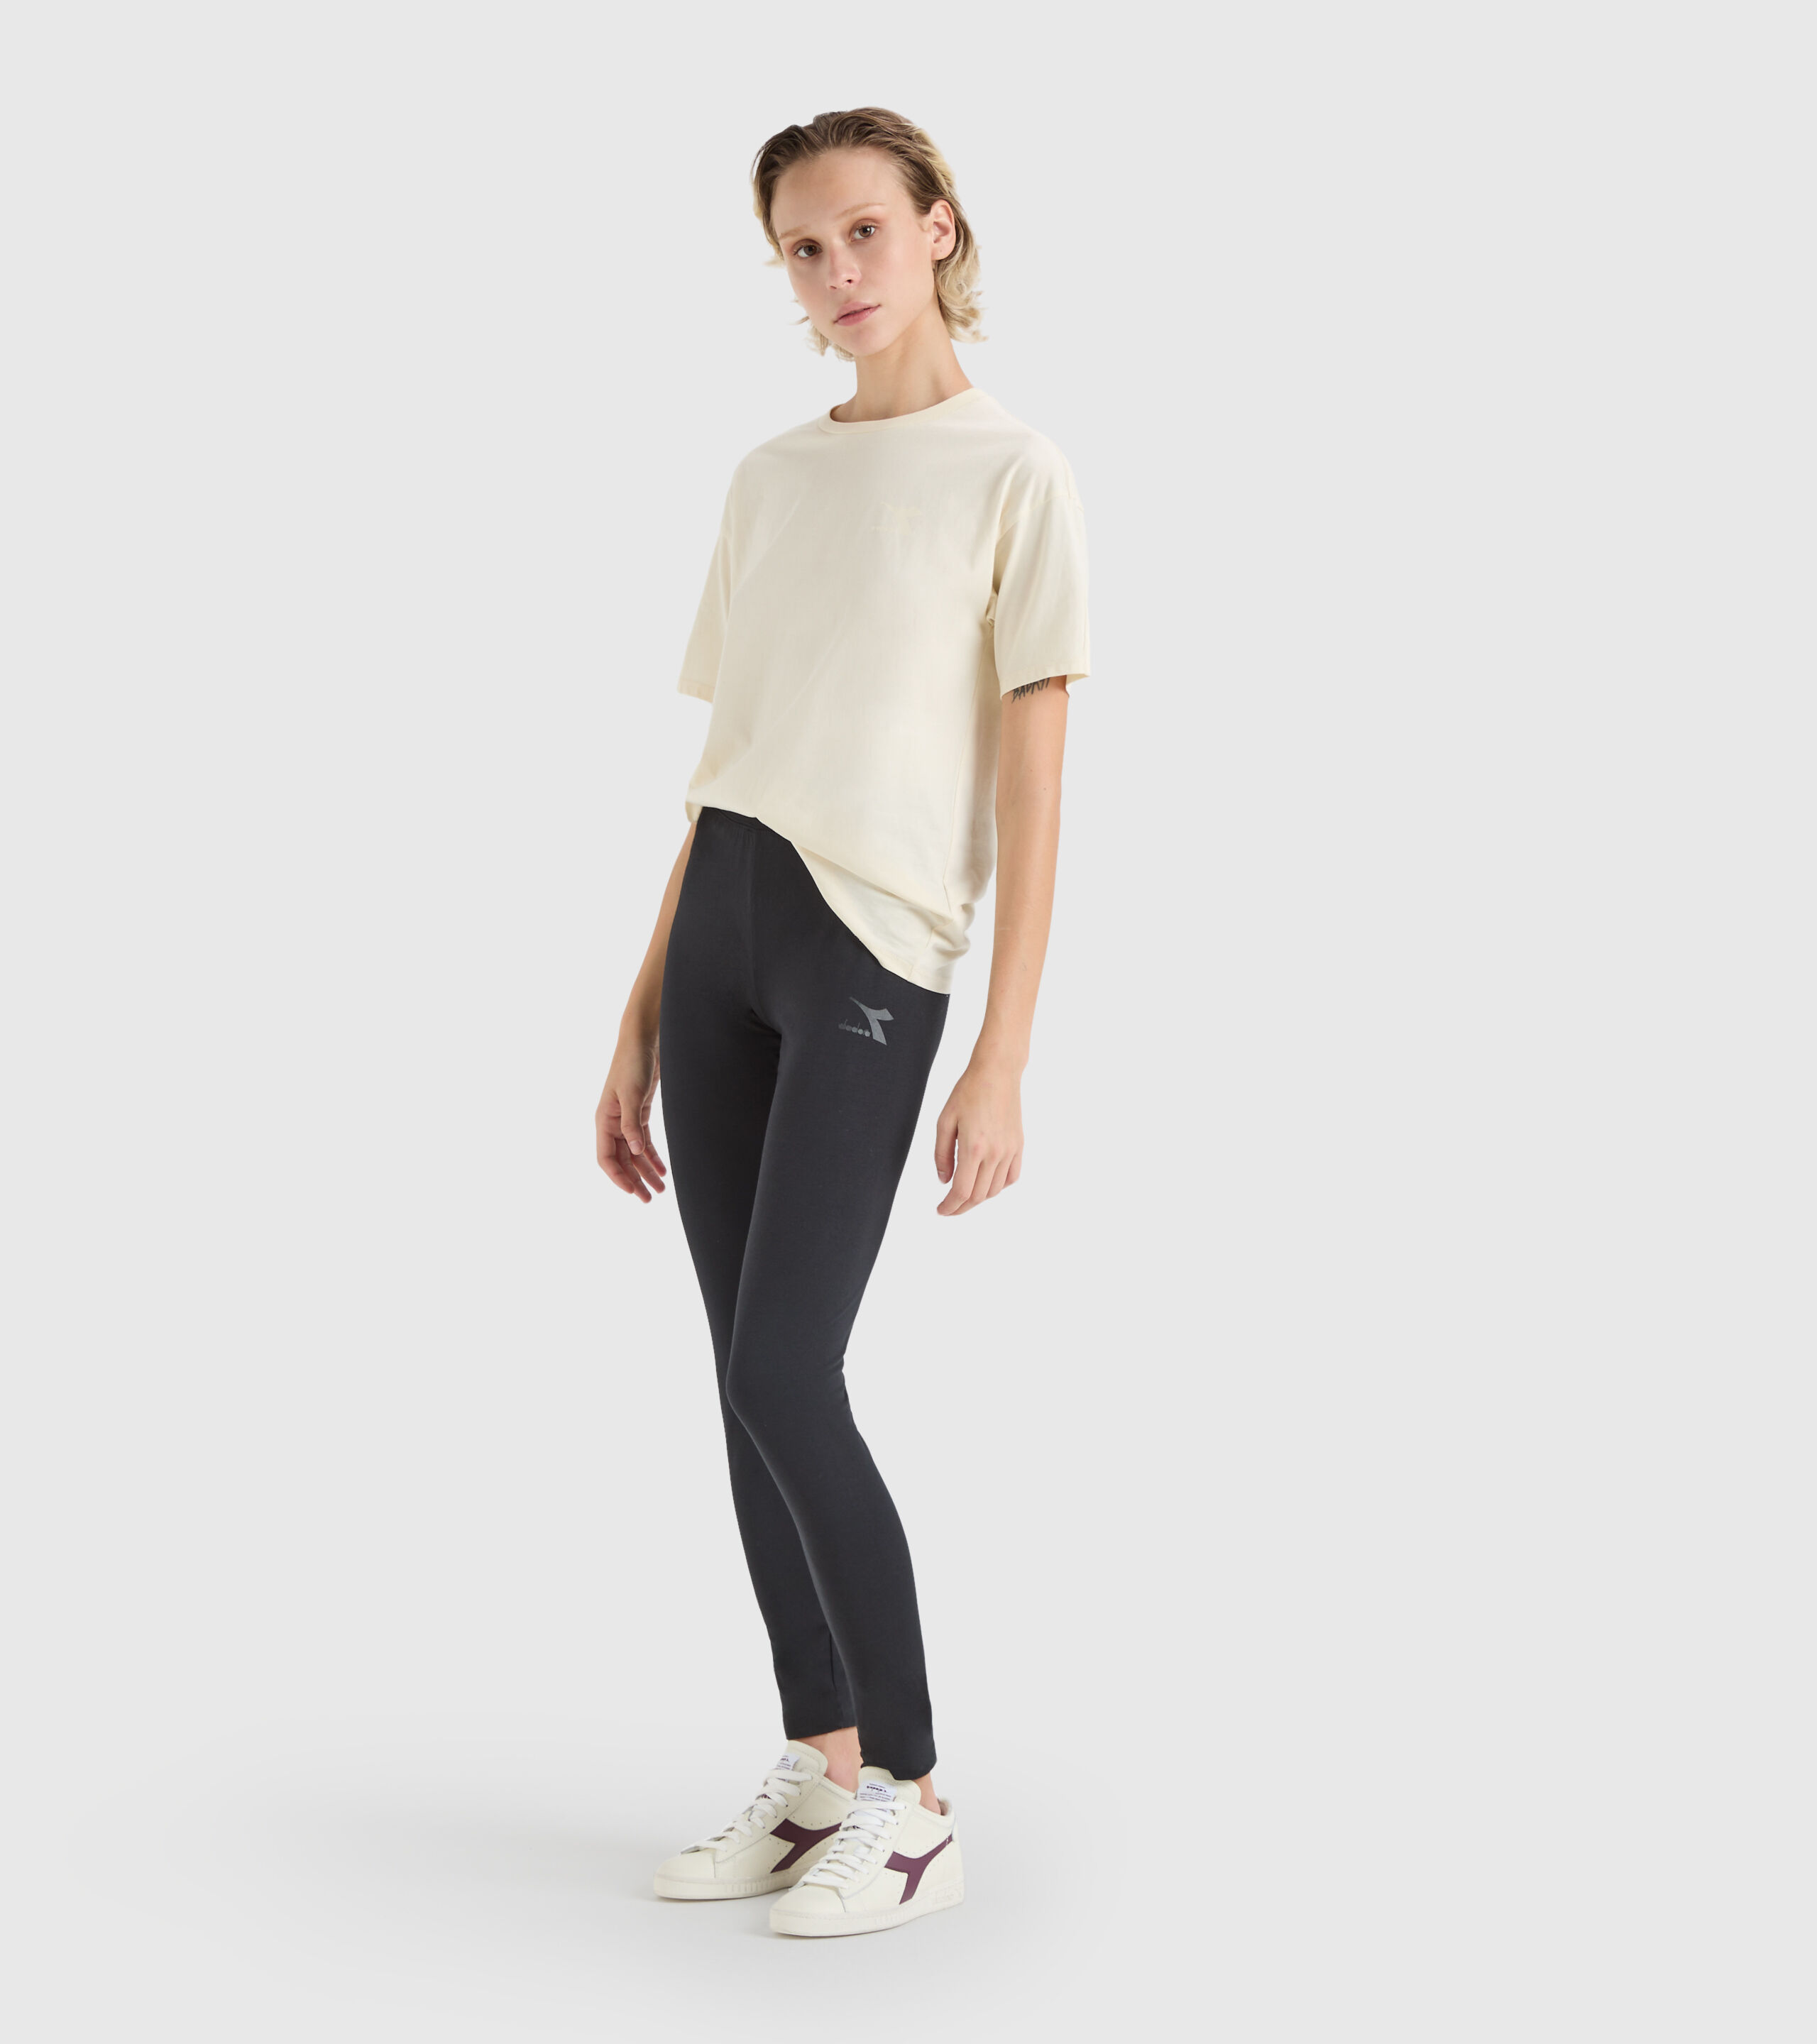 Decathlon Malaysia - [ HAPPY CHINESE NEW YEAR ] Hey everyone! SALTO WOMEN'S  GYM AND PILATES LEGGINGS Price : RM 19 Reference no. : 8366730 Made for Gym  & Pilates Simply indispensable.